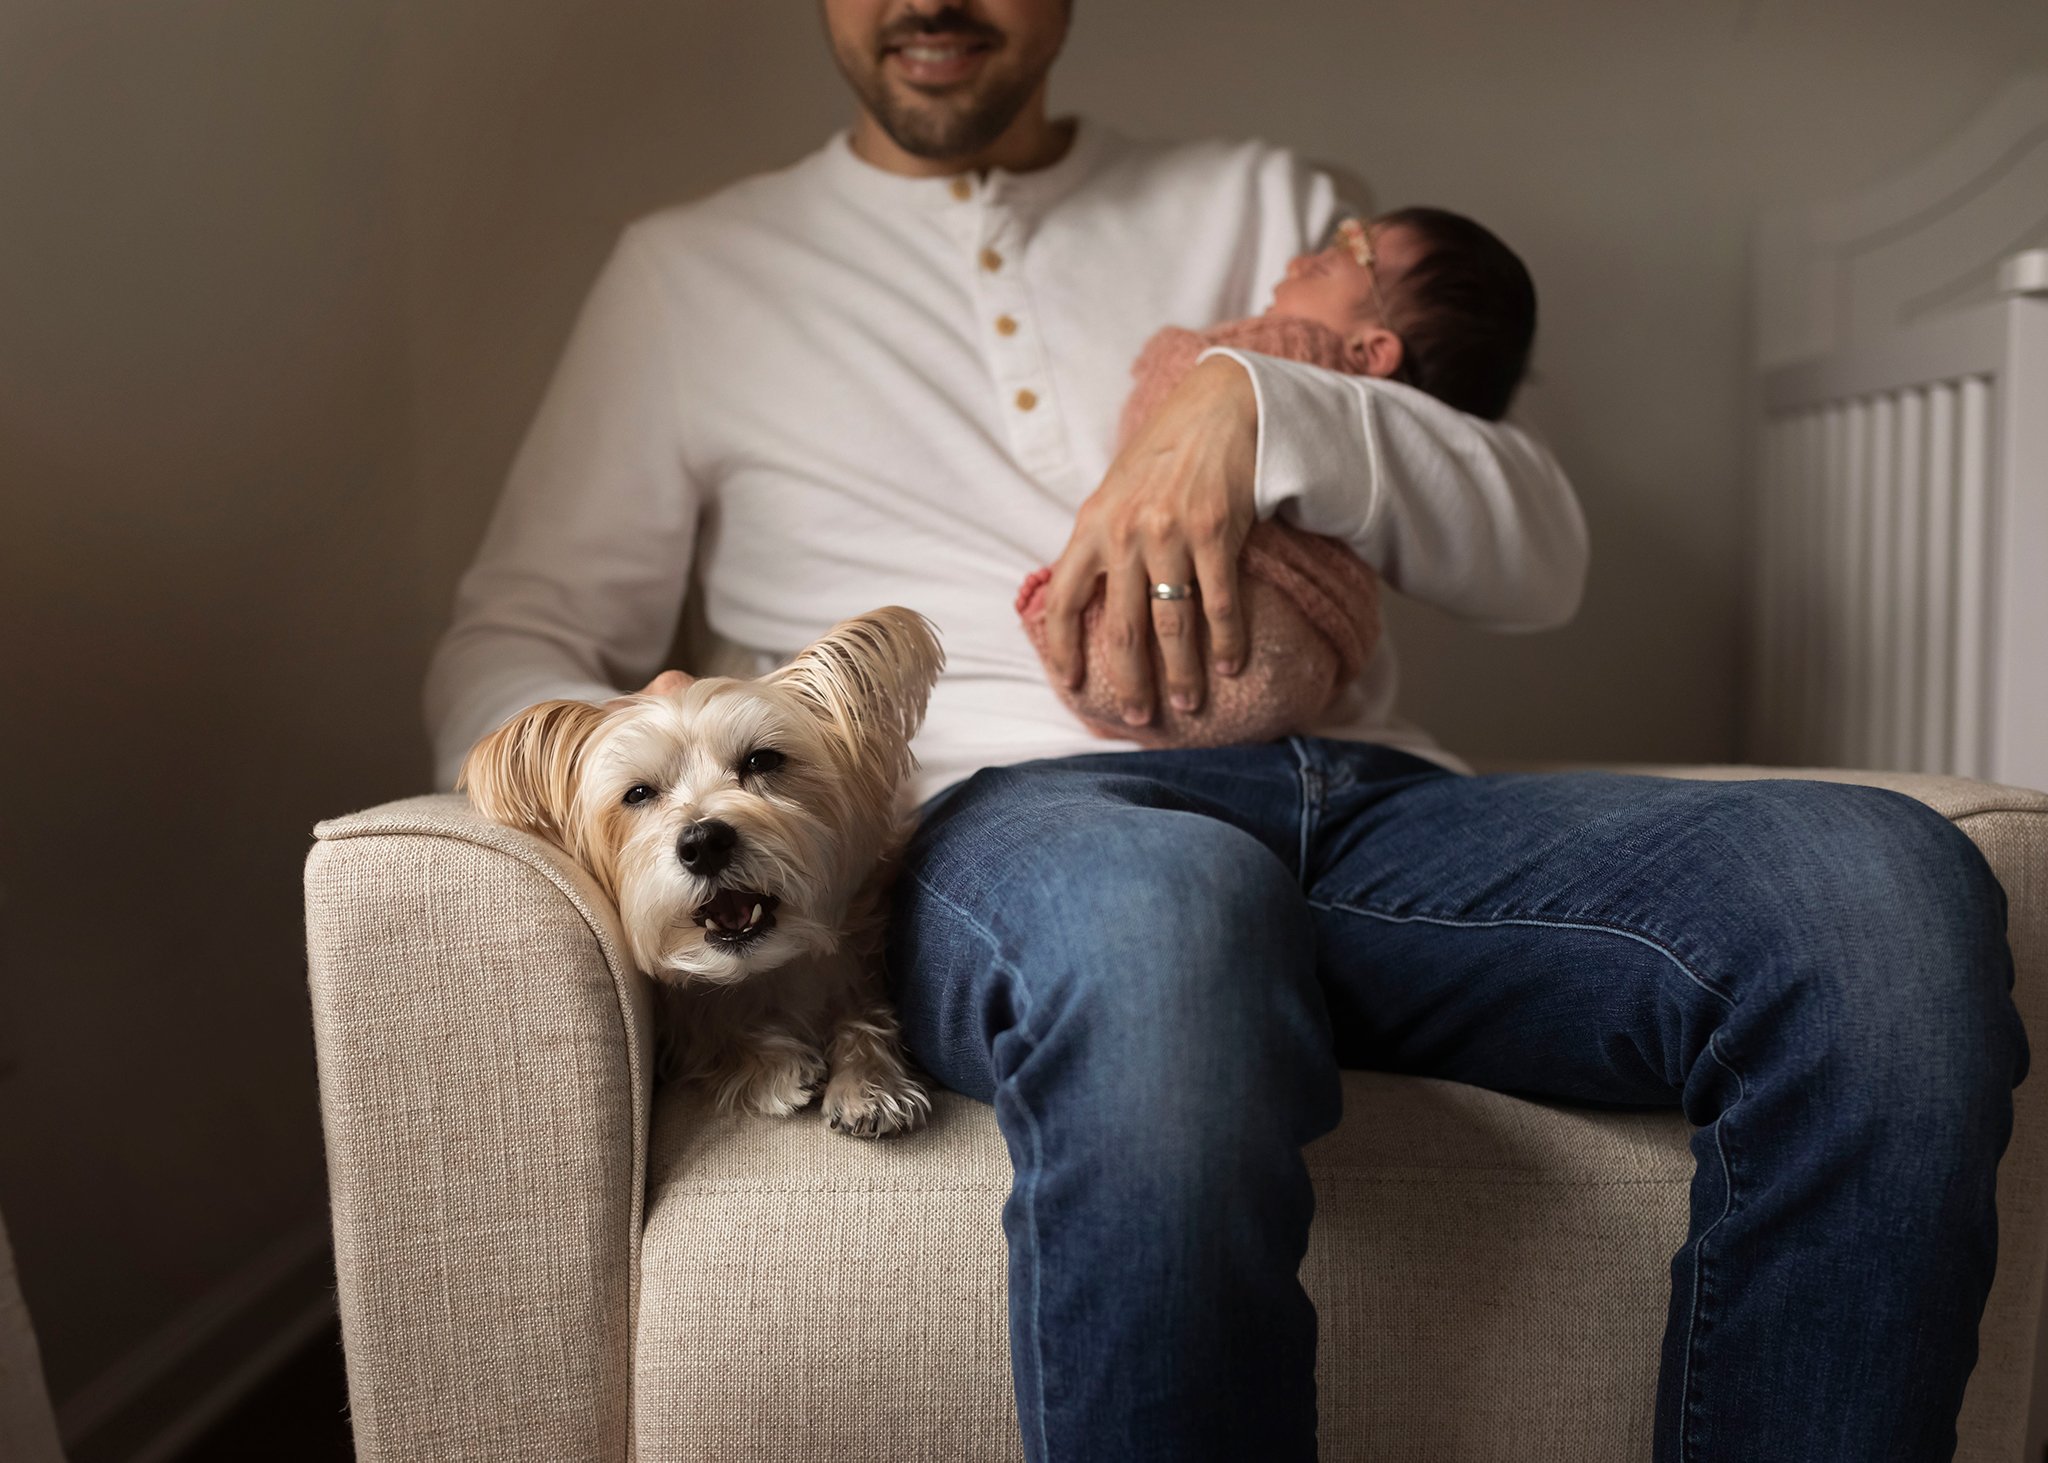 dad holding dog and baby